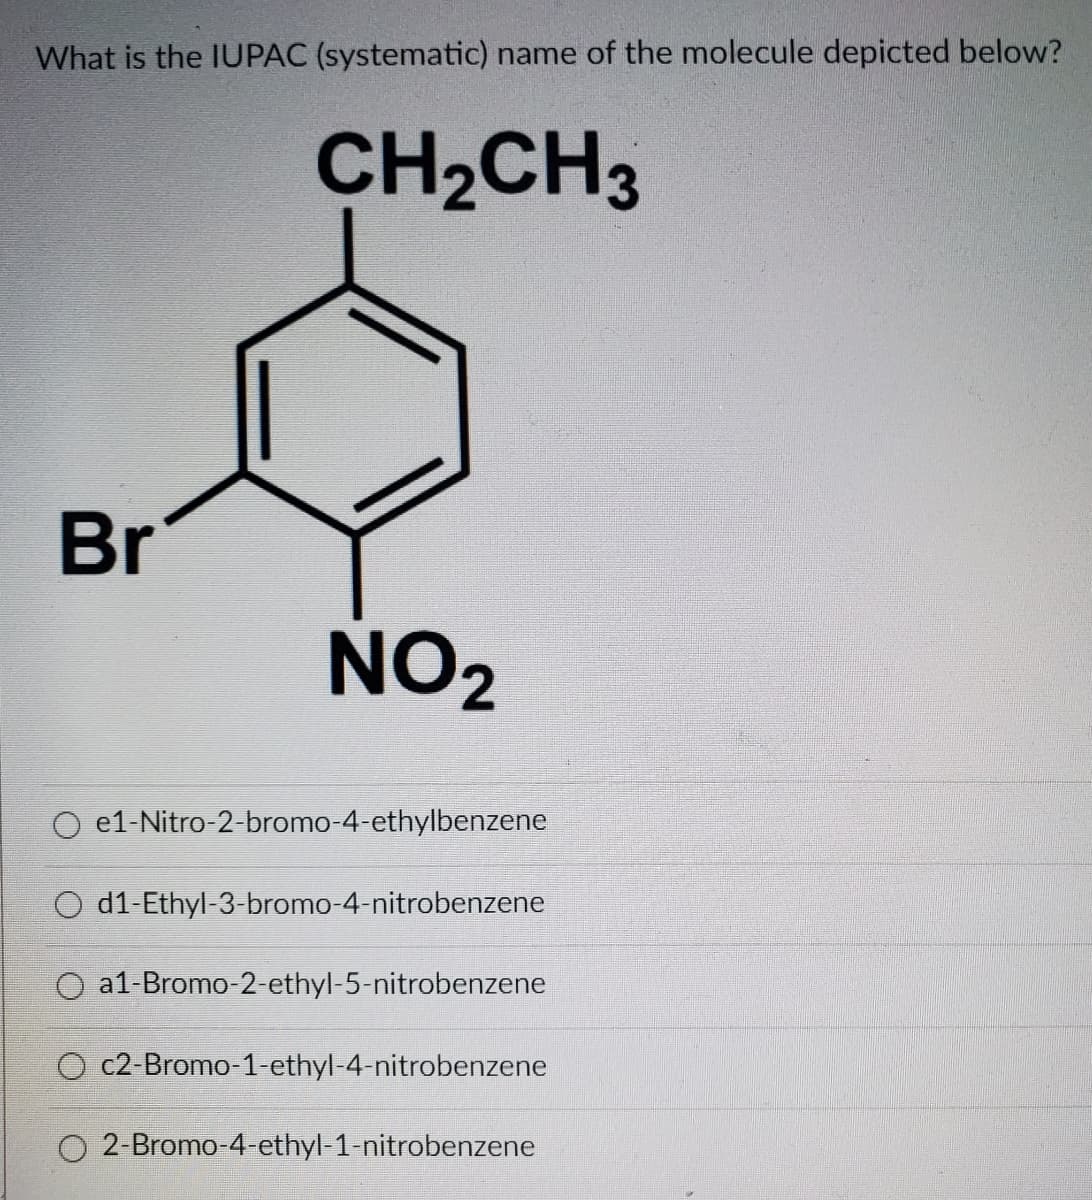 What is the IUPAC (systematic) name of the molecule depicted below?
CH2CH3
Br
NO2
e1-Nitro-2-bromo-4-ethylbenzene
d1-Ethyl-3-bromo-4-nitrobenzene
a1-Bromo-2-ethyl-5-nitrobenzene
O c2-Bromo 1 ethyl-4-nitrobenzene
2-Bromo-4-ethyl-1-nitrobenzene
